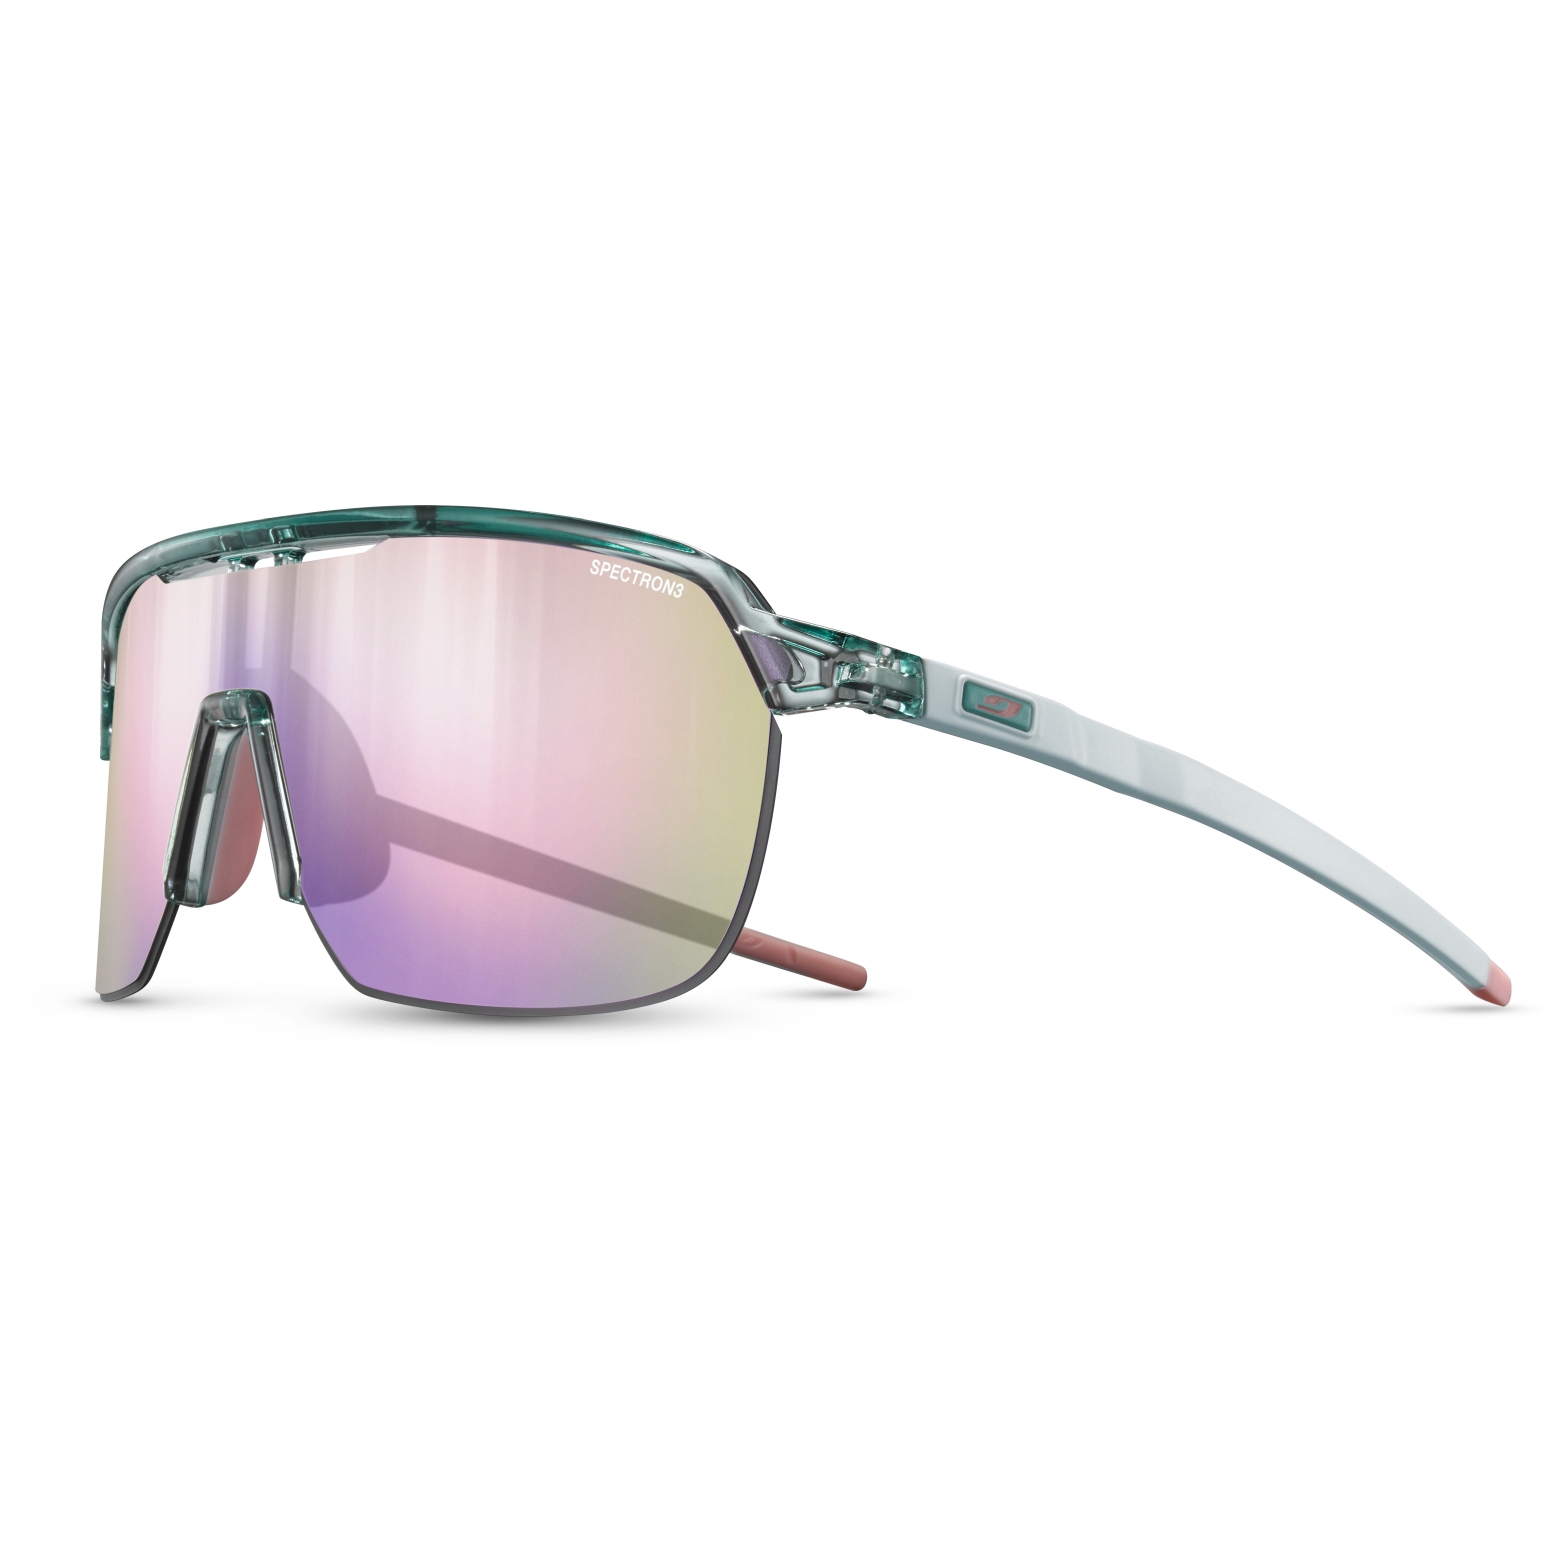 Picture of Julbo Frequency Sunglasses - Light Green Pink / Multilayer Light Pink Spectron 3